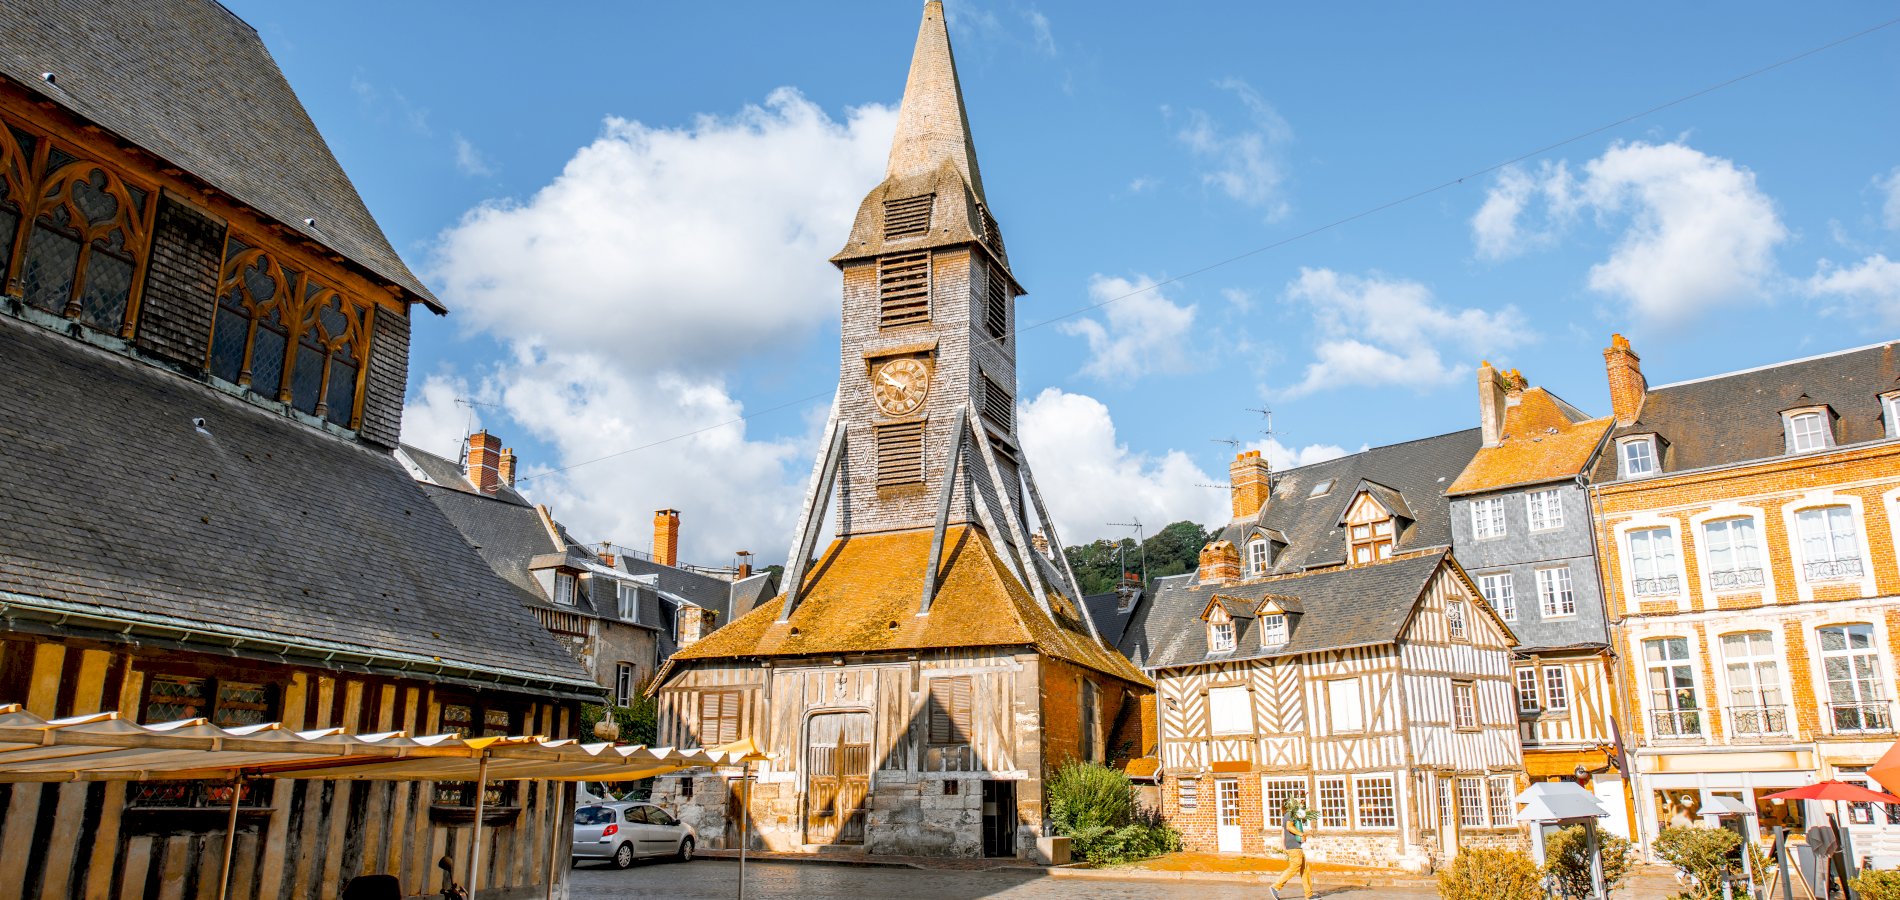 Ophorus Tours - A Private Shore Excursion From Honfleur to Giverny Gardens & Honfleur Visit